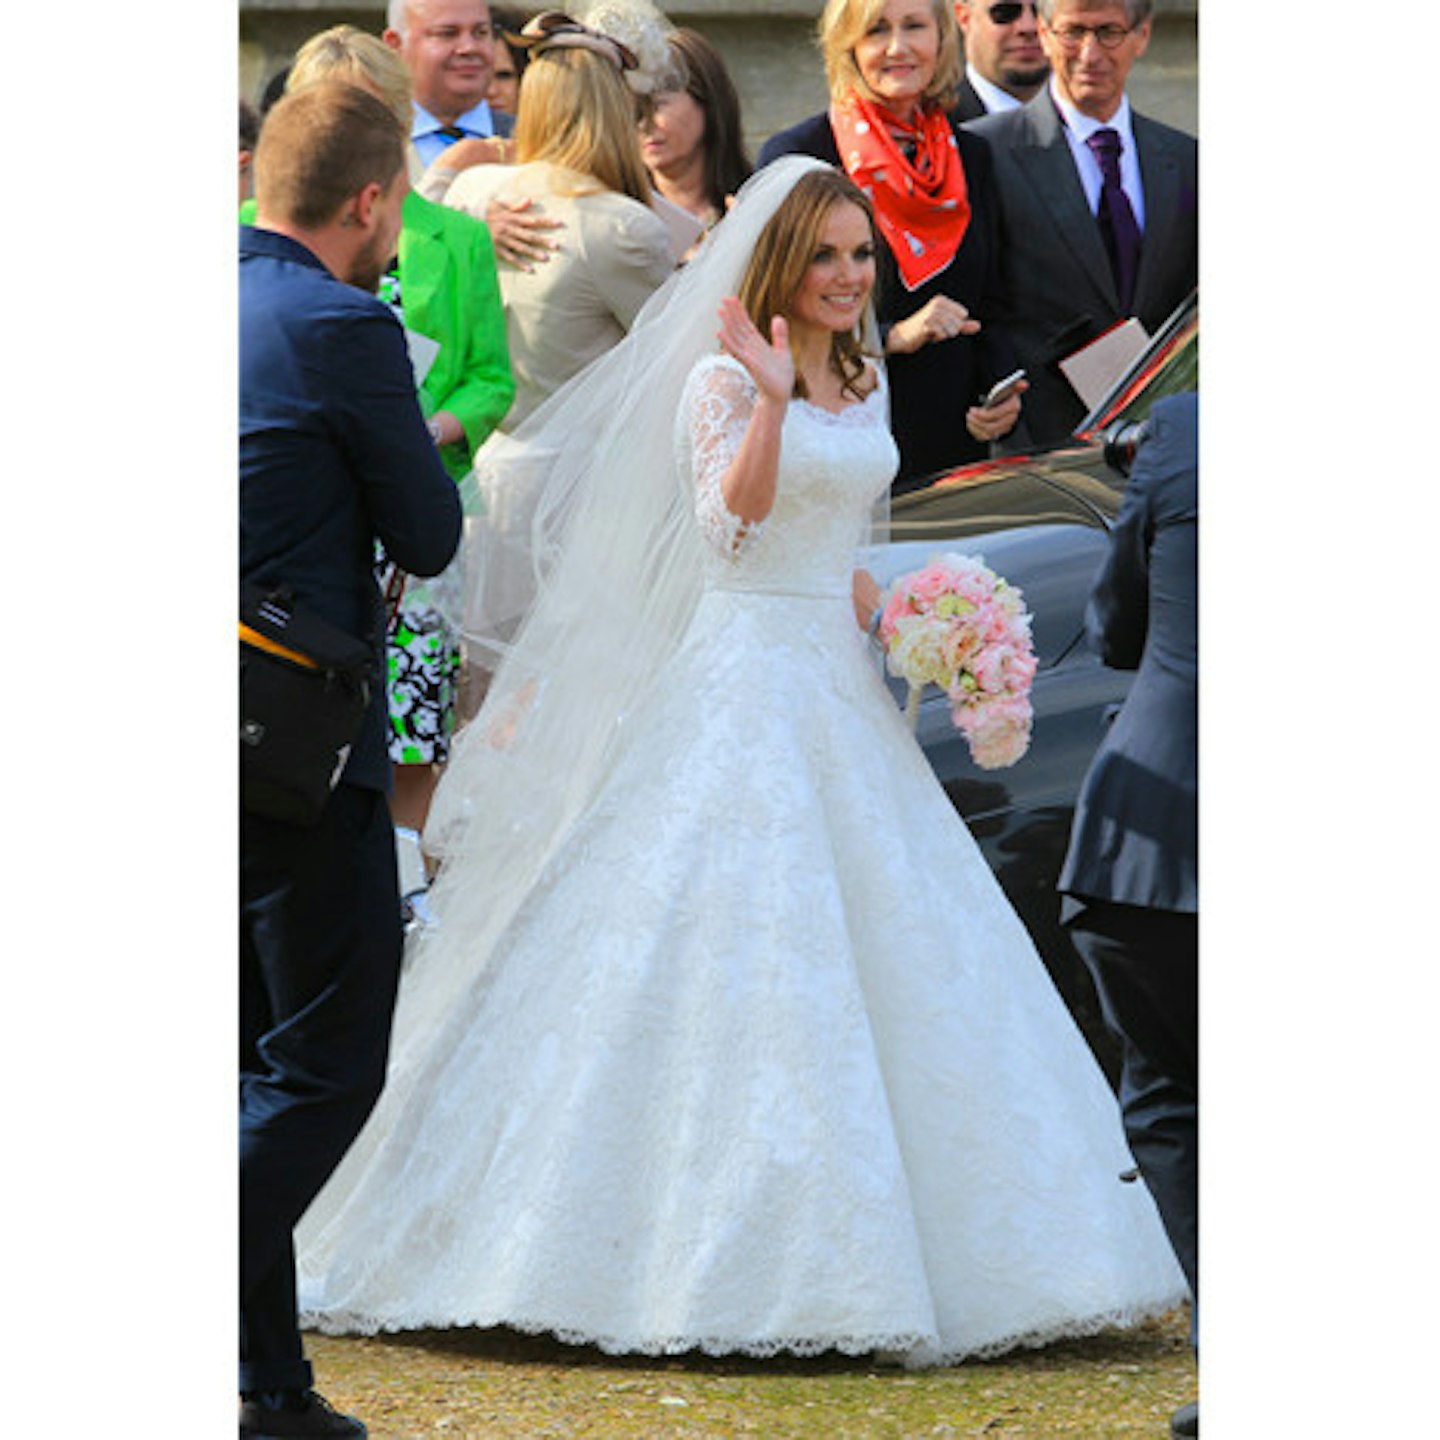 Geri on the 'happiest day of her life'